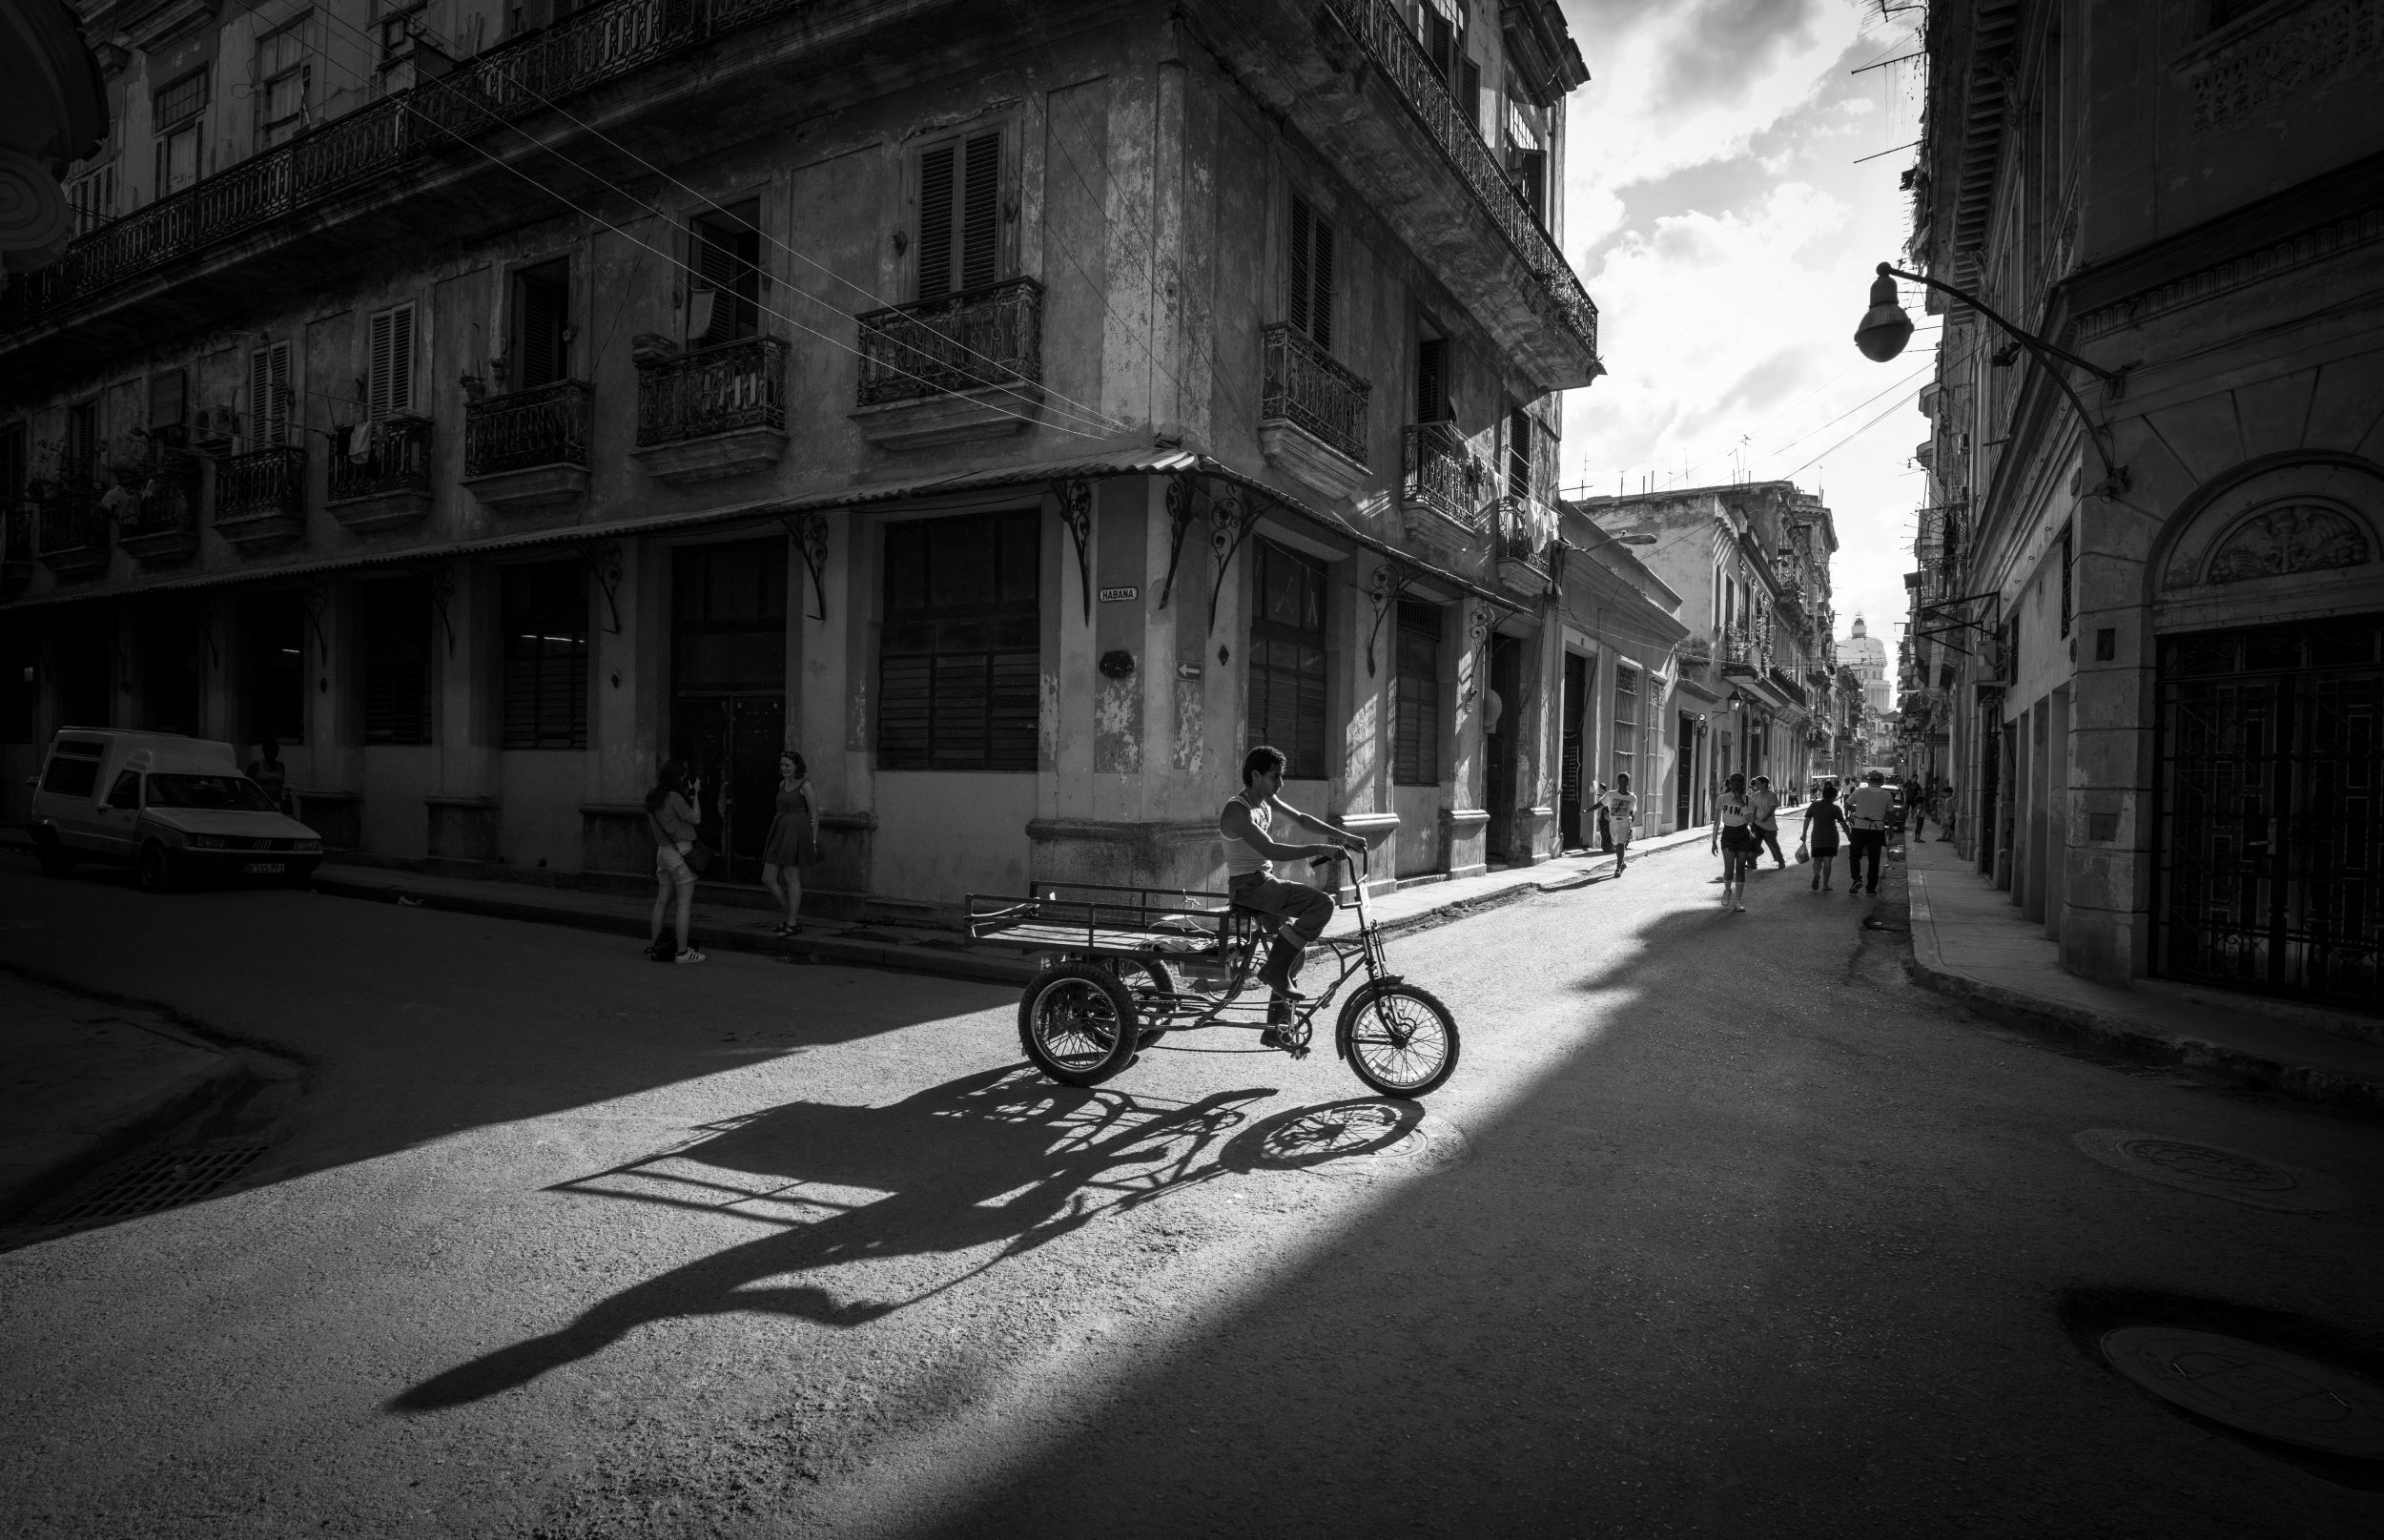 A piece of life in Cuba